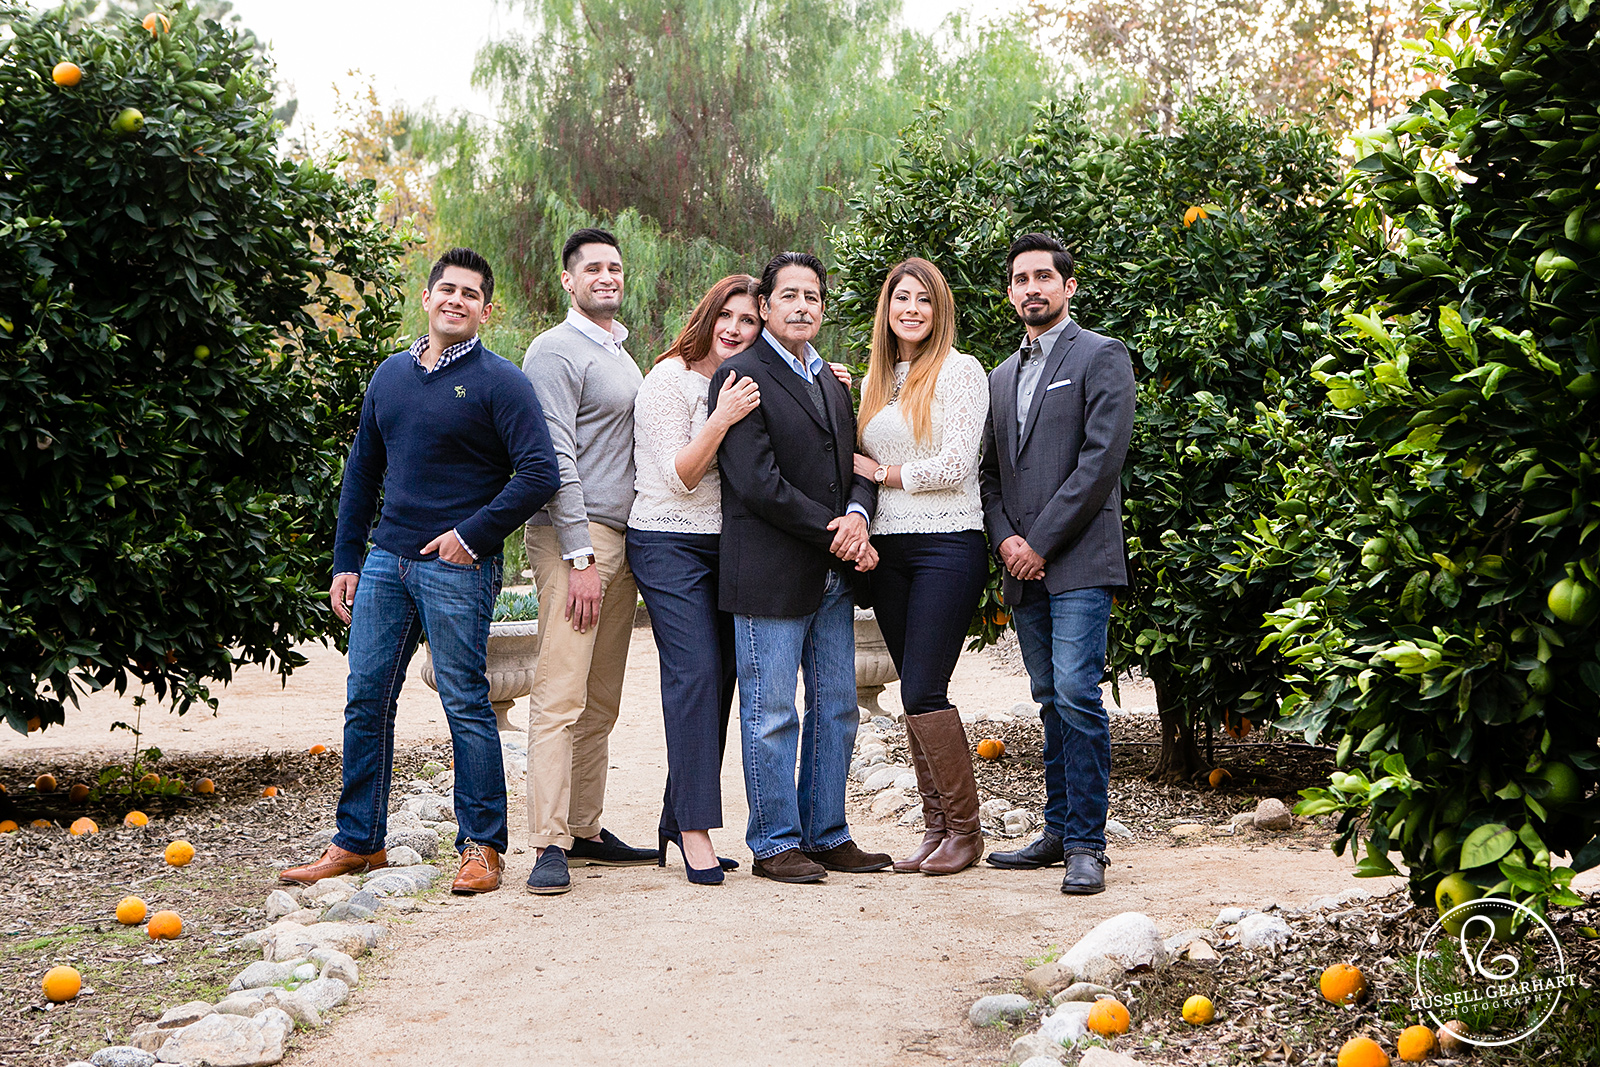 Pasadena Family Portraits: The Medrano Family – Russell Gearhart Photography – www.gearhartphoto.com